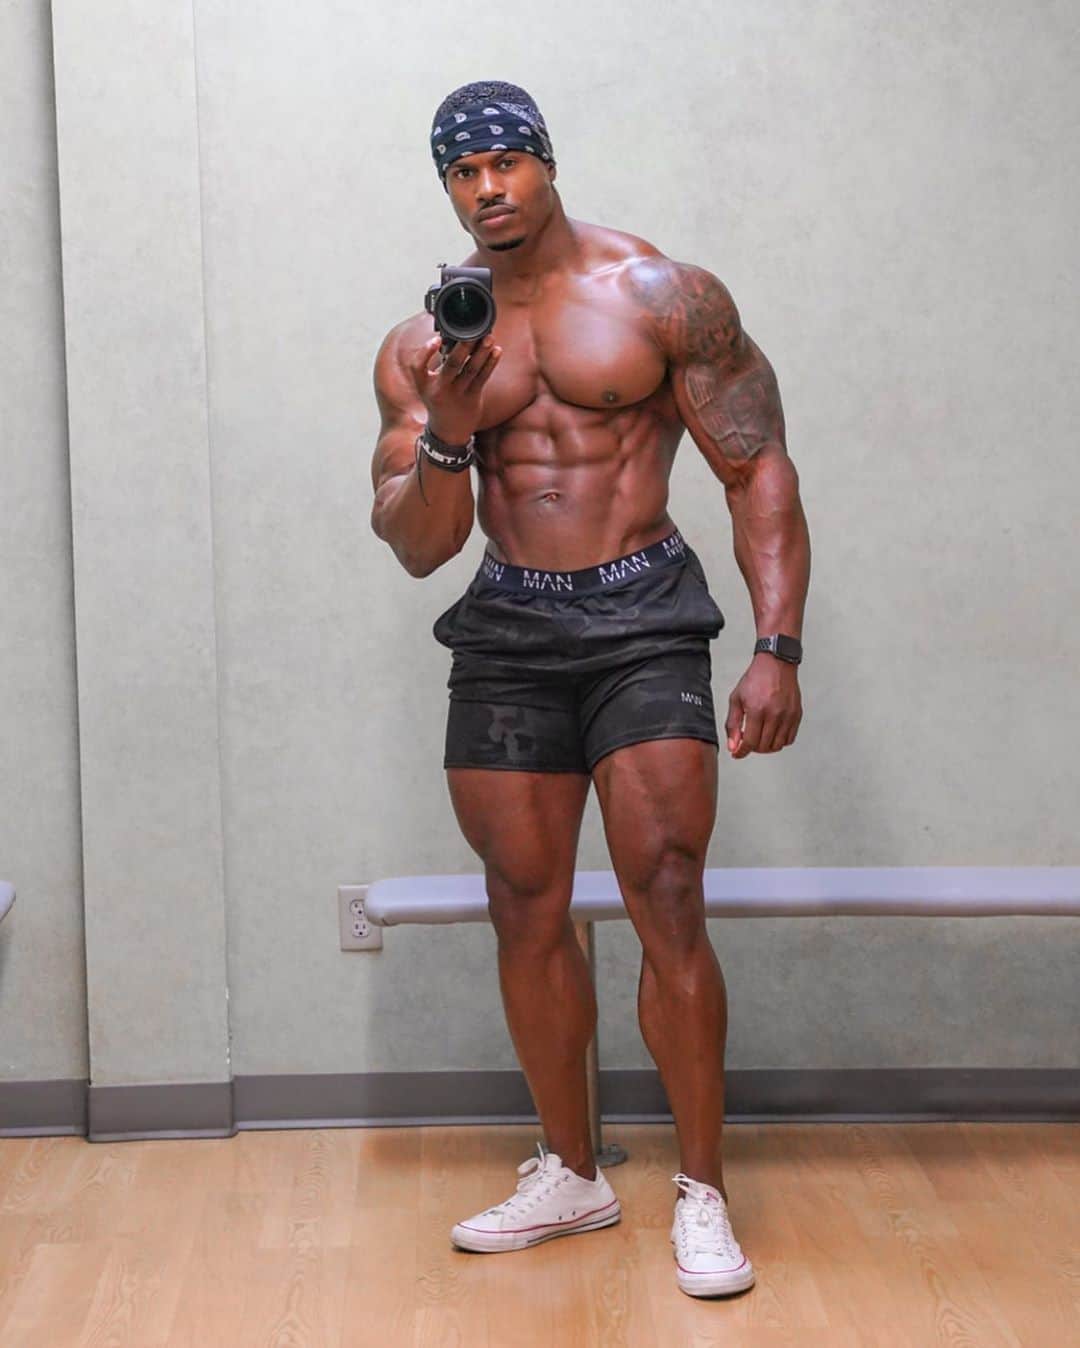 Simeon Pandaさんのインスタグラム写真 - (Simeon PandaInstagram)「Smash each & every session this week 💪🏾 Crazy pump courtesy of @innosupps Max Strength 💥 on the weekend 😅⁣ ⁣ 🔥 Download my diet & full training routines at SIMEONPANDA.COM⁣⁣⁣⁣⁣⁣ ⁣ 💵 Sign up to the @elimin8challenge for your chance to win a share of $6,000 💵 just to get in the best shape of your life 💪 Head to Elimin8.com  Link in bio⁣⁣⁣ ⁣⁣⁣ 👉 Be sure to SUBSCRIBE to my YouTube channel: YouTube.com/simeonpanda 👈⁣⁣⁣⁣⁣⁣⁣⁣⁣ Many more 🏠 home workouts all FREE at Youtube.com/simeonpanda ⁣⁣⁣⁣⁣⁣⁣⁣⁣ ⁣⁣⁣⁣⁣⁣ 💊 Follow @innosupps INNOSUPPS.COM ⚡️ for the supplements I use👌🏾⁣⁣⁣⁣⁣⁣⁣ ⁣⁣⁣⁣⁣ #simeonpanda ⁣」9月28日 23時27分 - simeonpanda